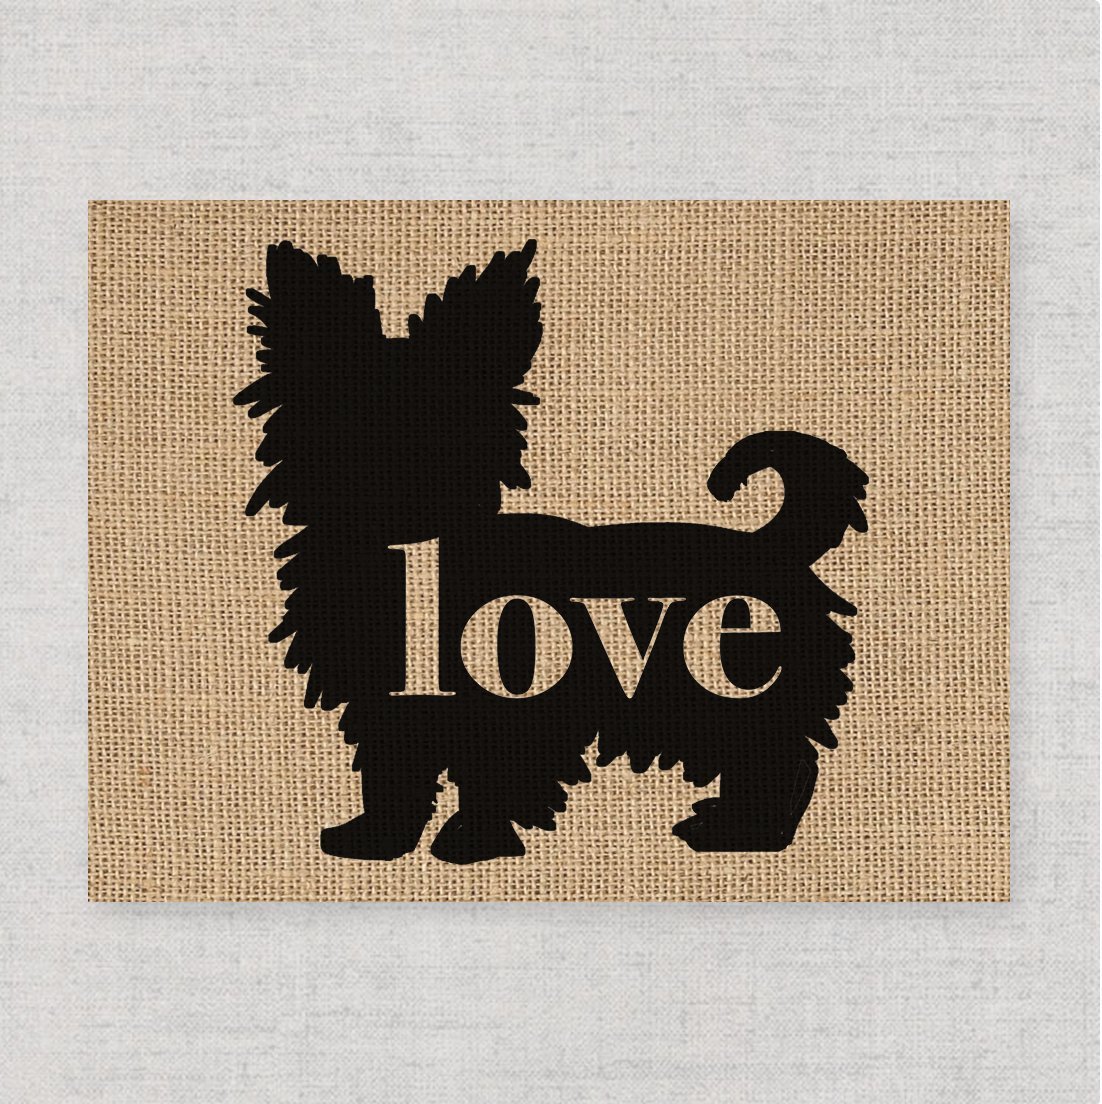 Yorkshire Terrier (Yorkie) Love (Short Haired): An Unframed 8x10 Dog Breed Wall Art Print on Your Choice of Fine art Paper or Laminated Burlap (Can be Personalized)